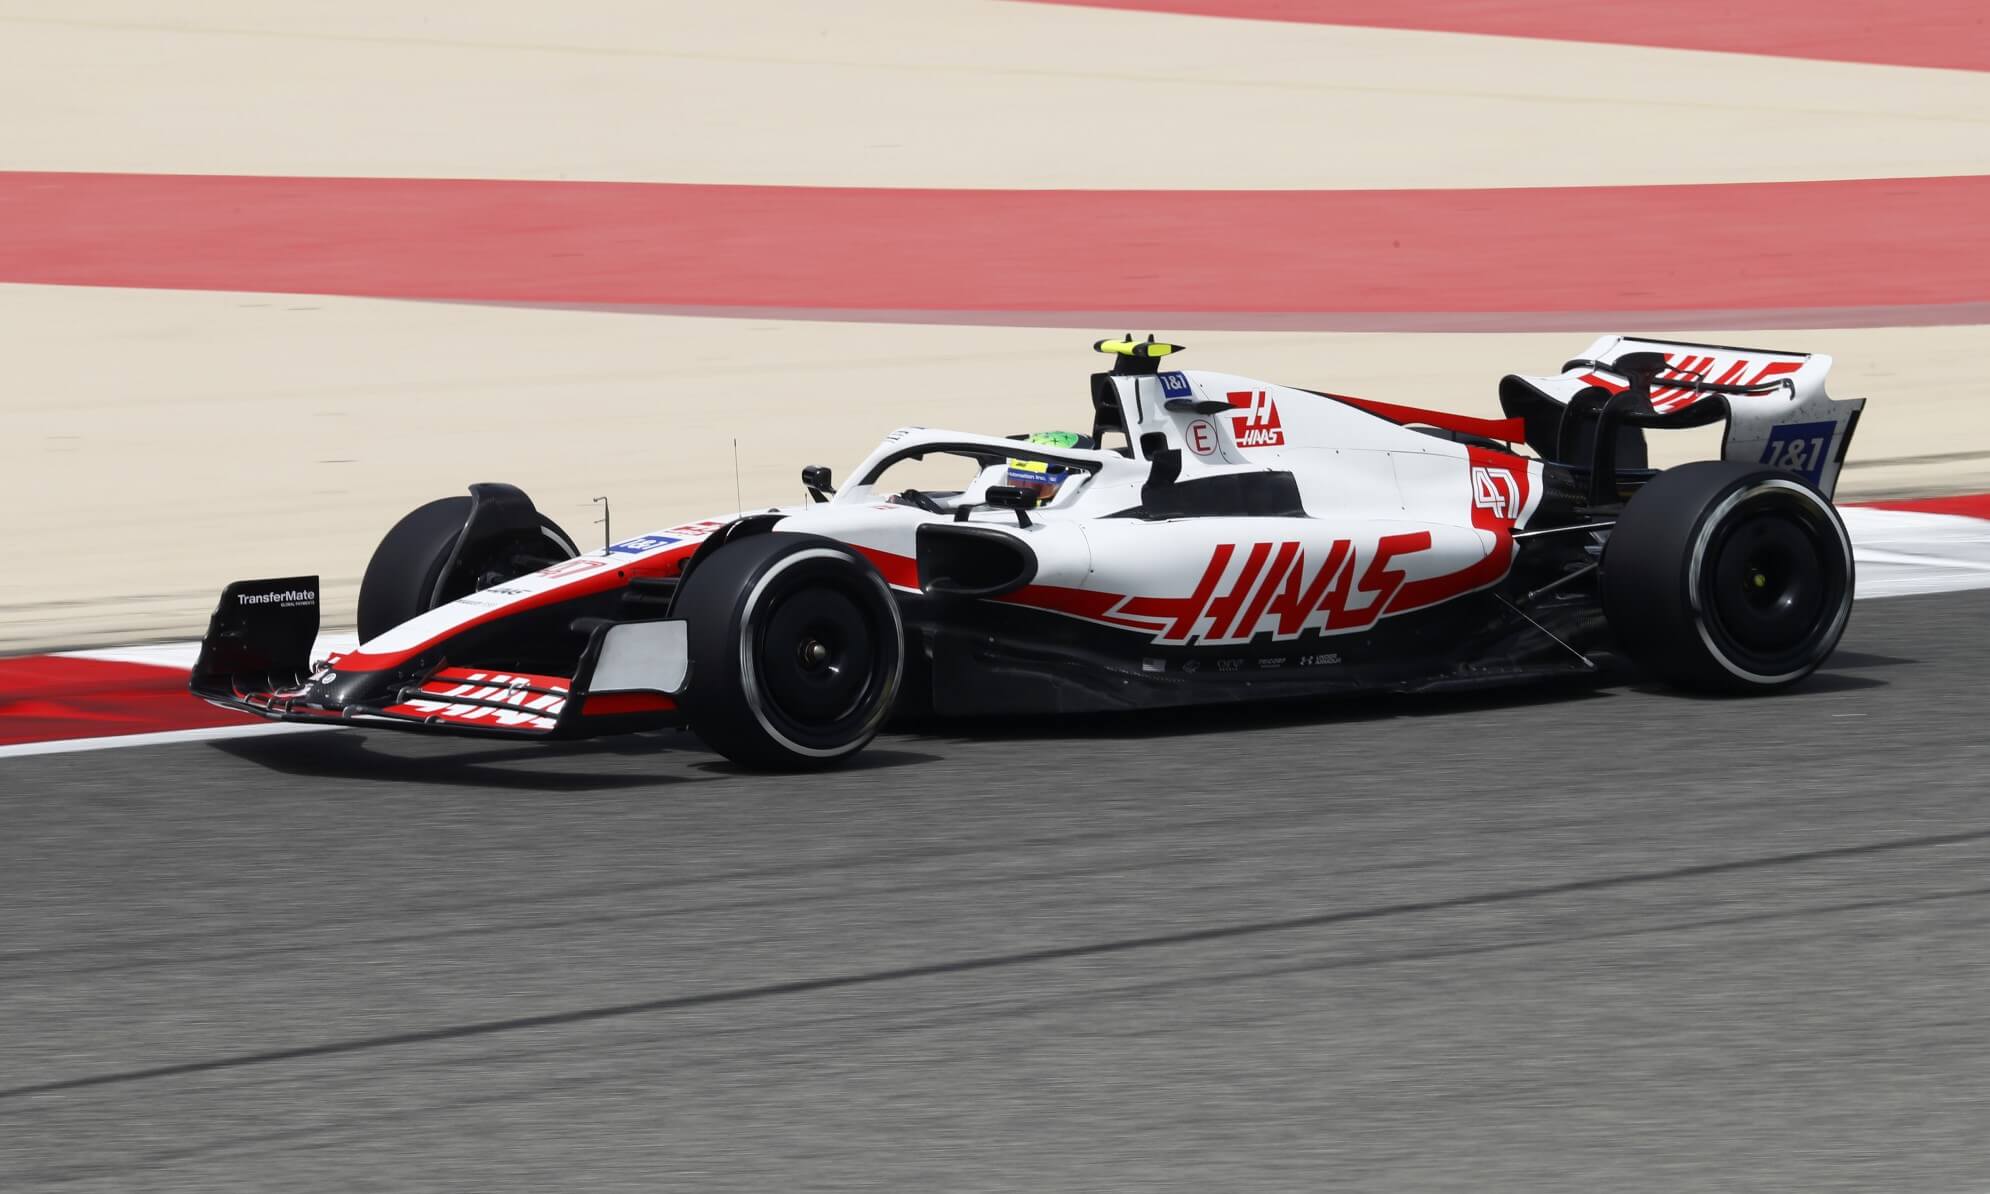 Haas were quick in F1 testing 2022